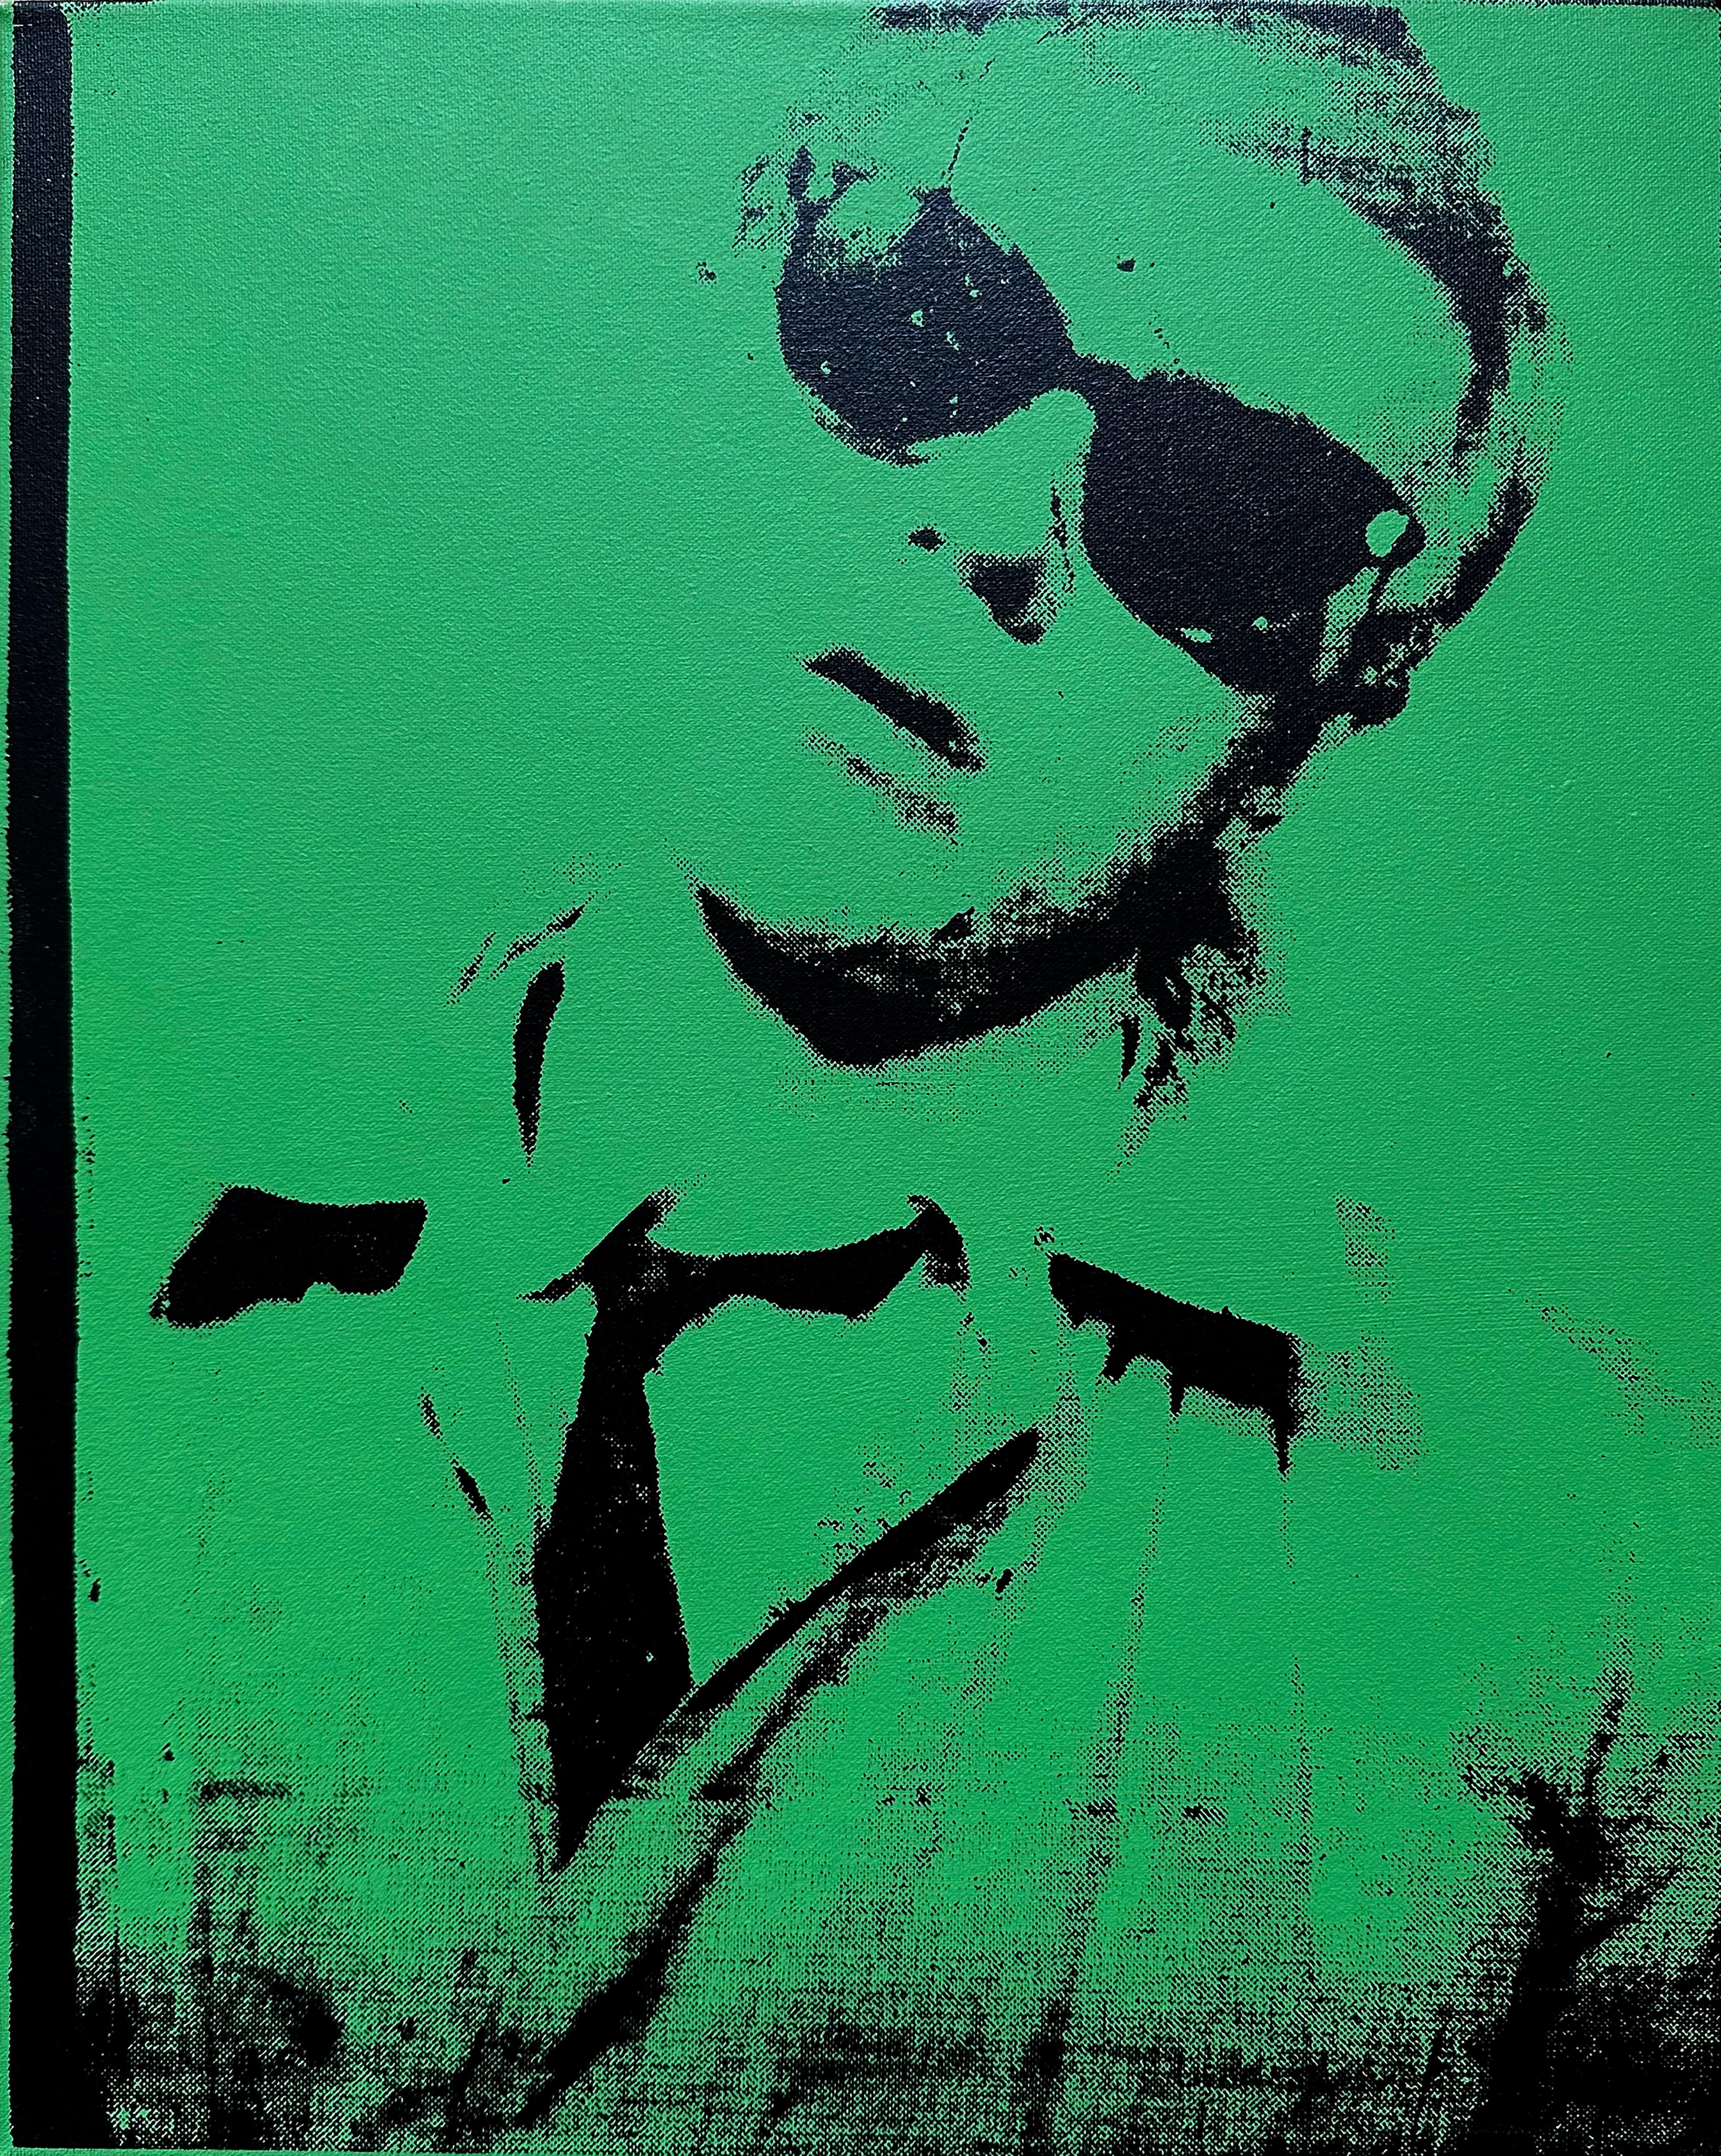 Denied Warhol Green Self Portrait Photo Booth Painting by Charles Lutz
Silkscreen and acrylic on linen with Denied stamp of the Andy Warhol Art Authentication Board.
20 x 16